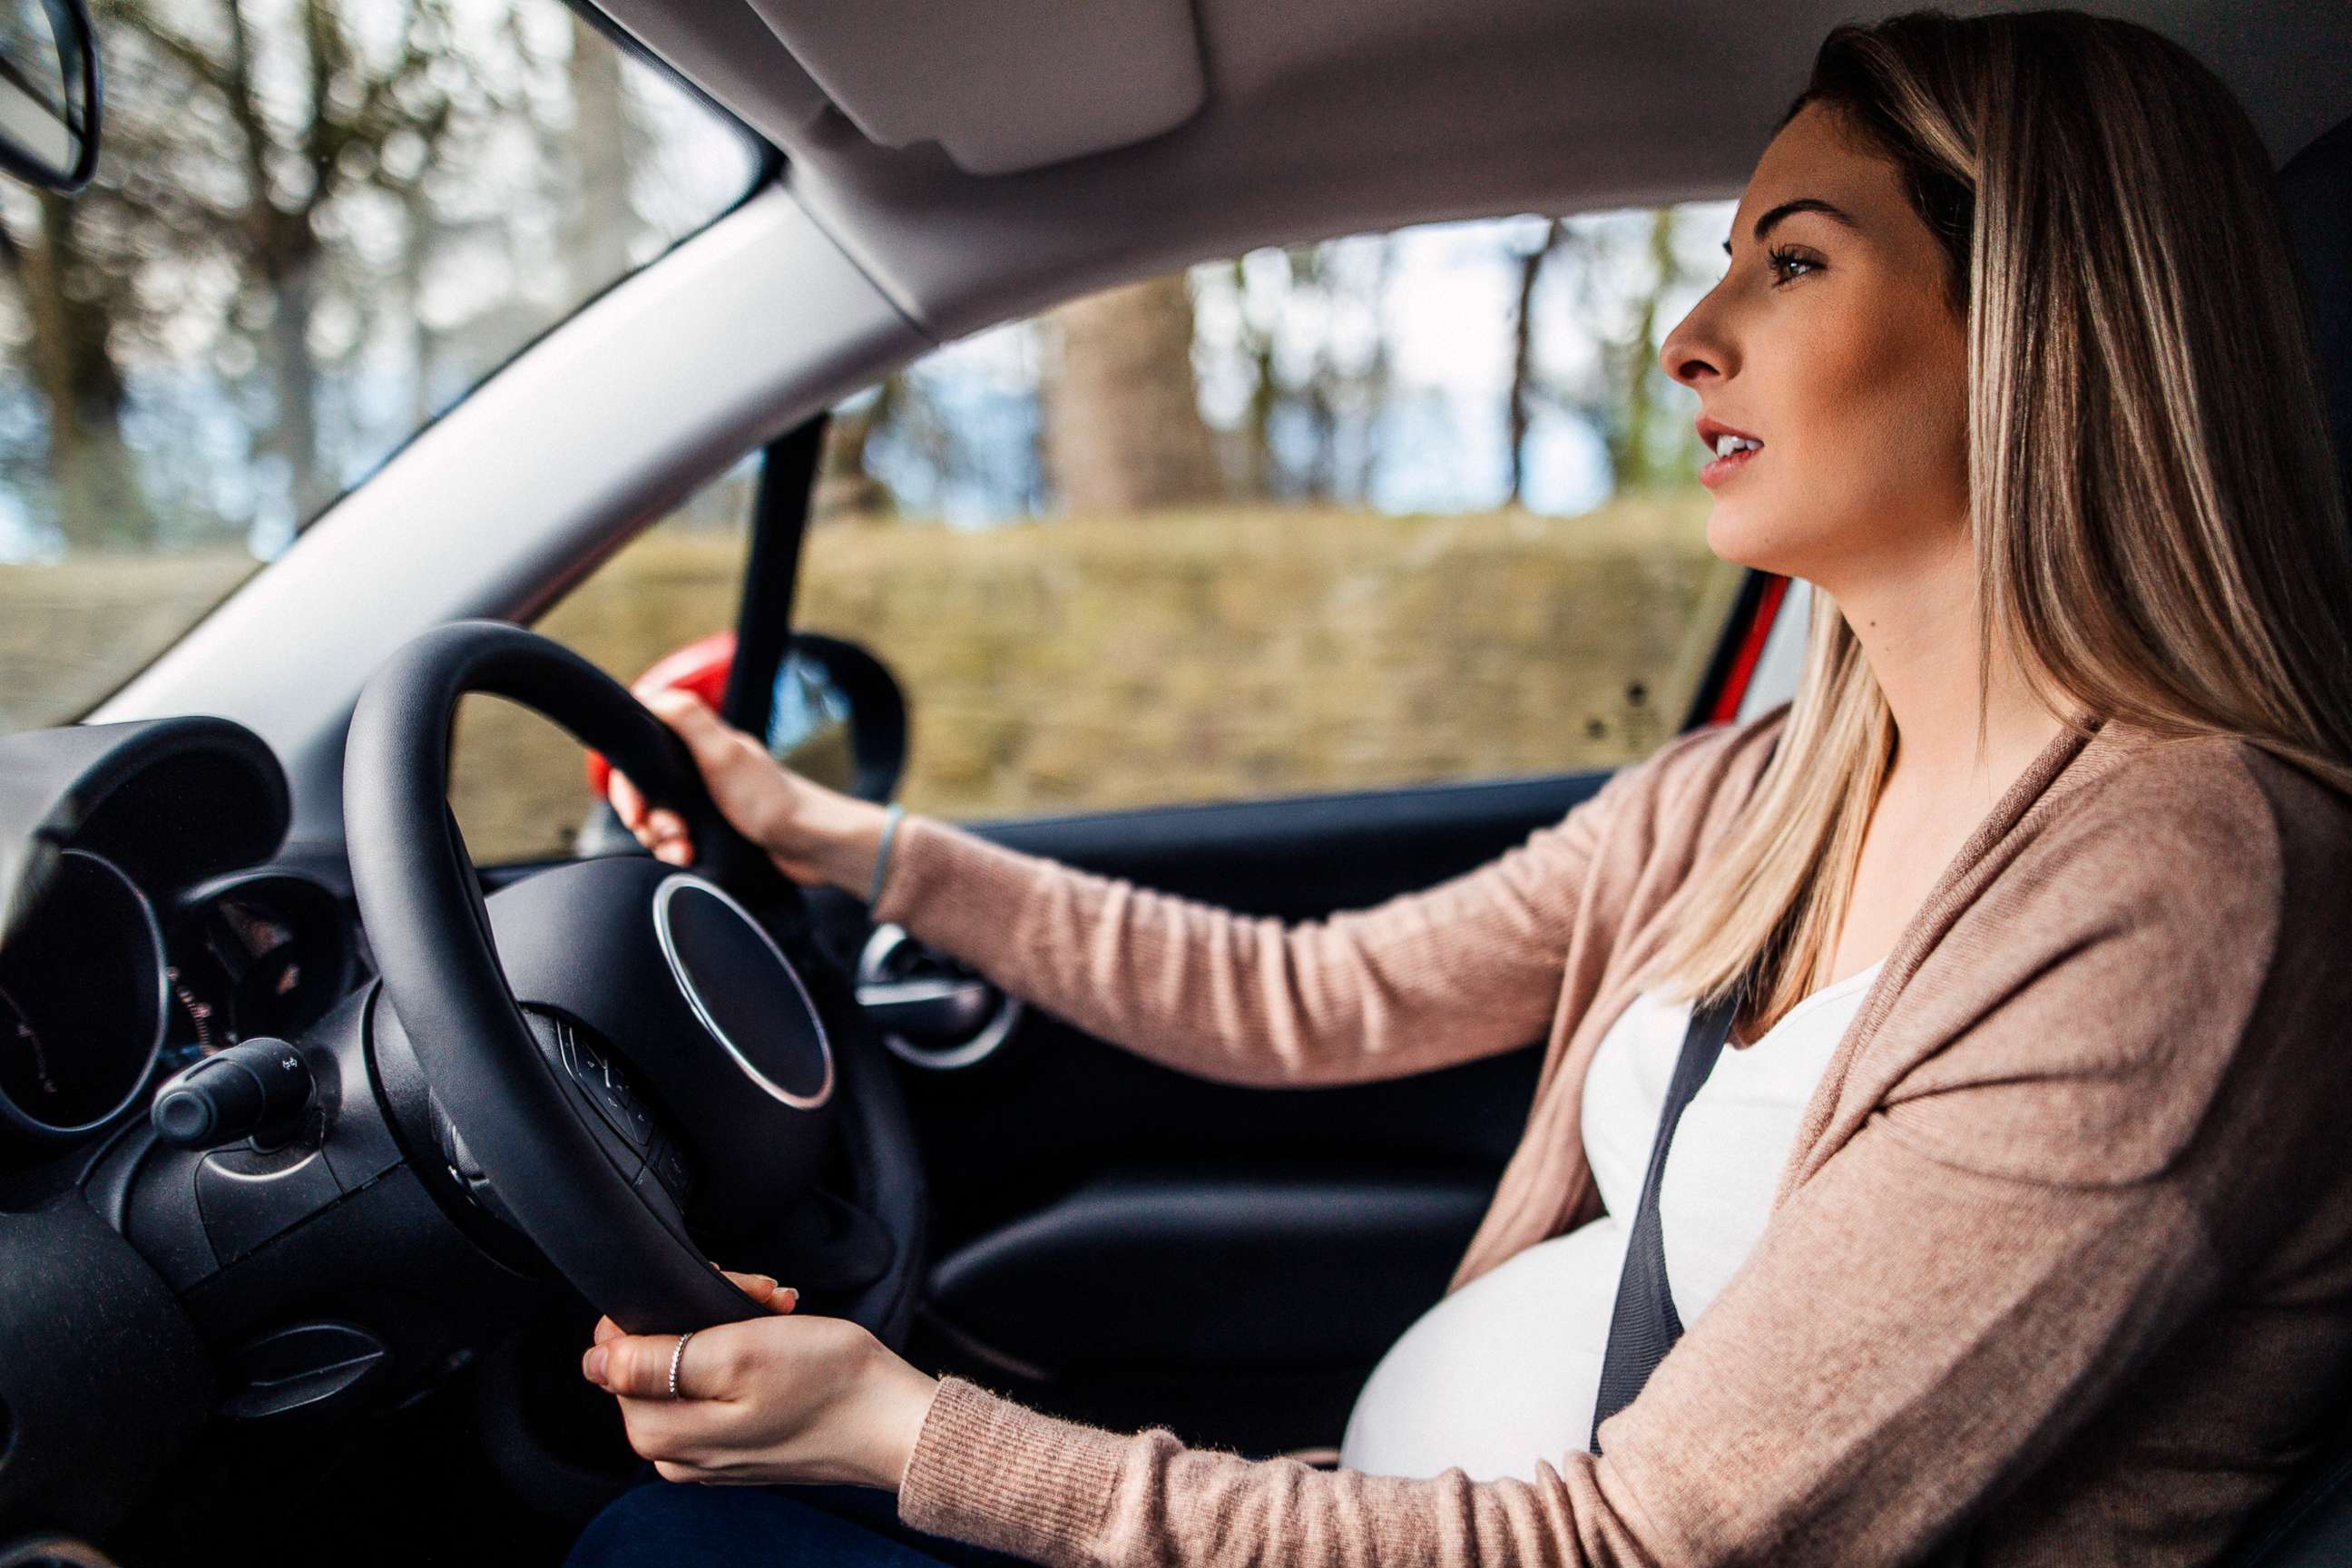 PHOTO: A young woman appears to be  driving a car while pregnant in this stock photo.